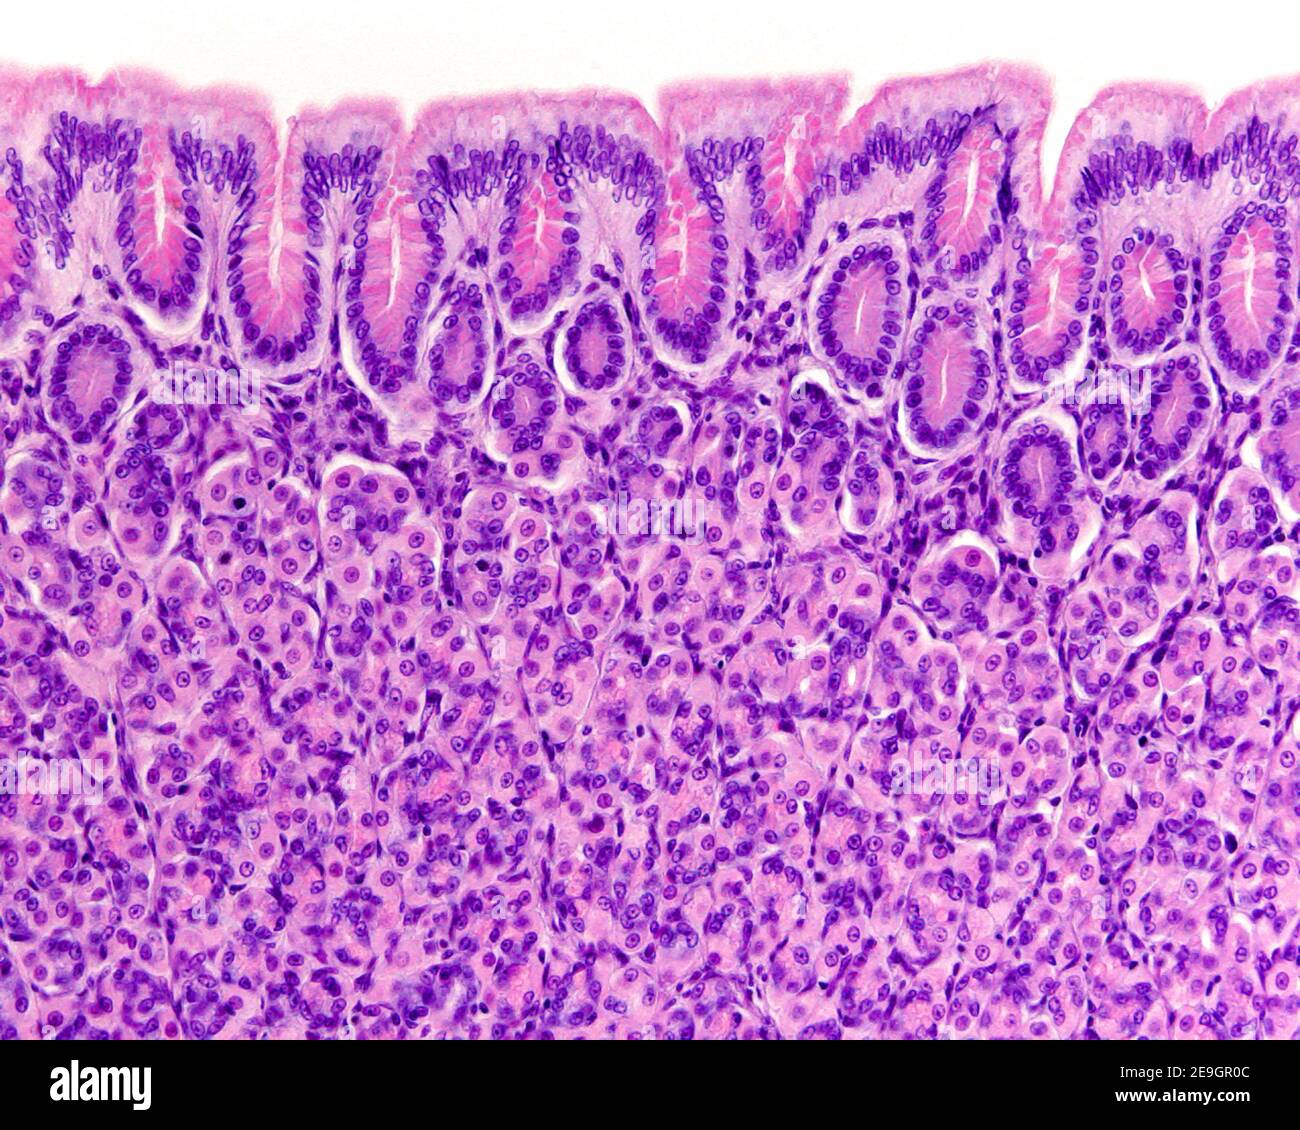 Gastric mucosa showing the surface mucous epithelium, the gastric pits and the fundic glands with many pink parietal cells Stock Photo